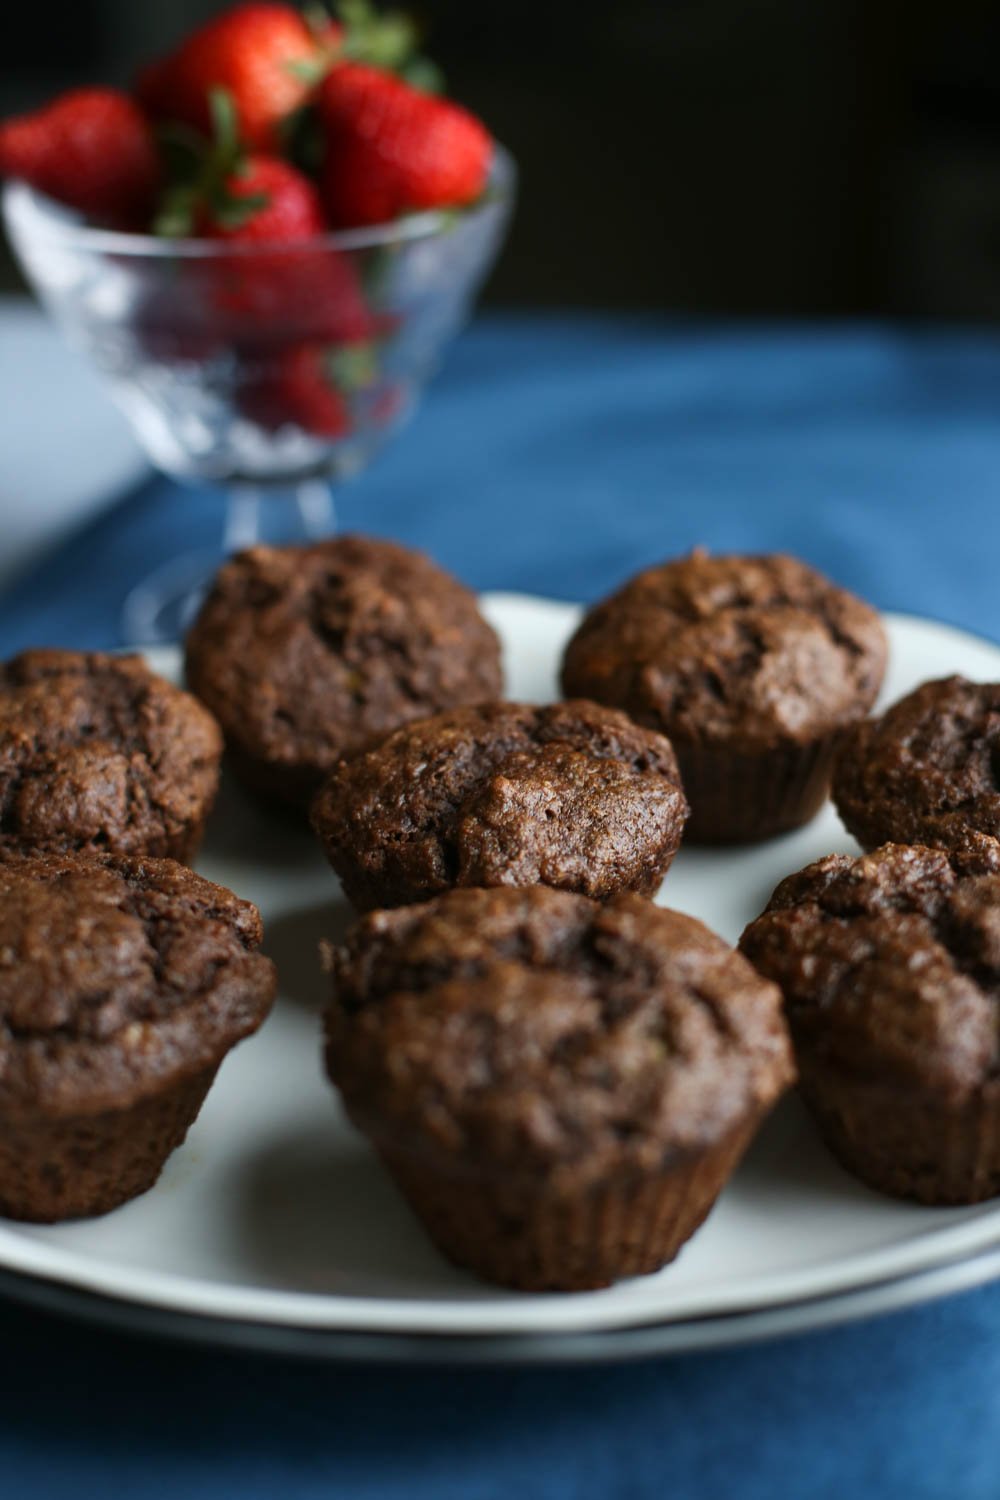 Chocolate banana muffins on a white plate with a bowl of whole strawberries in the background.